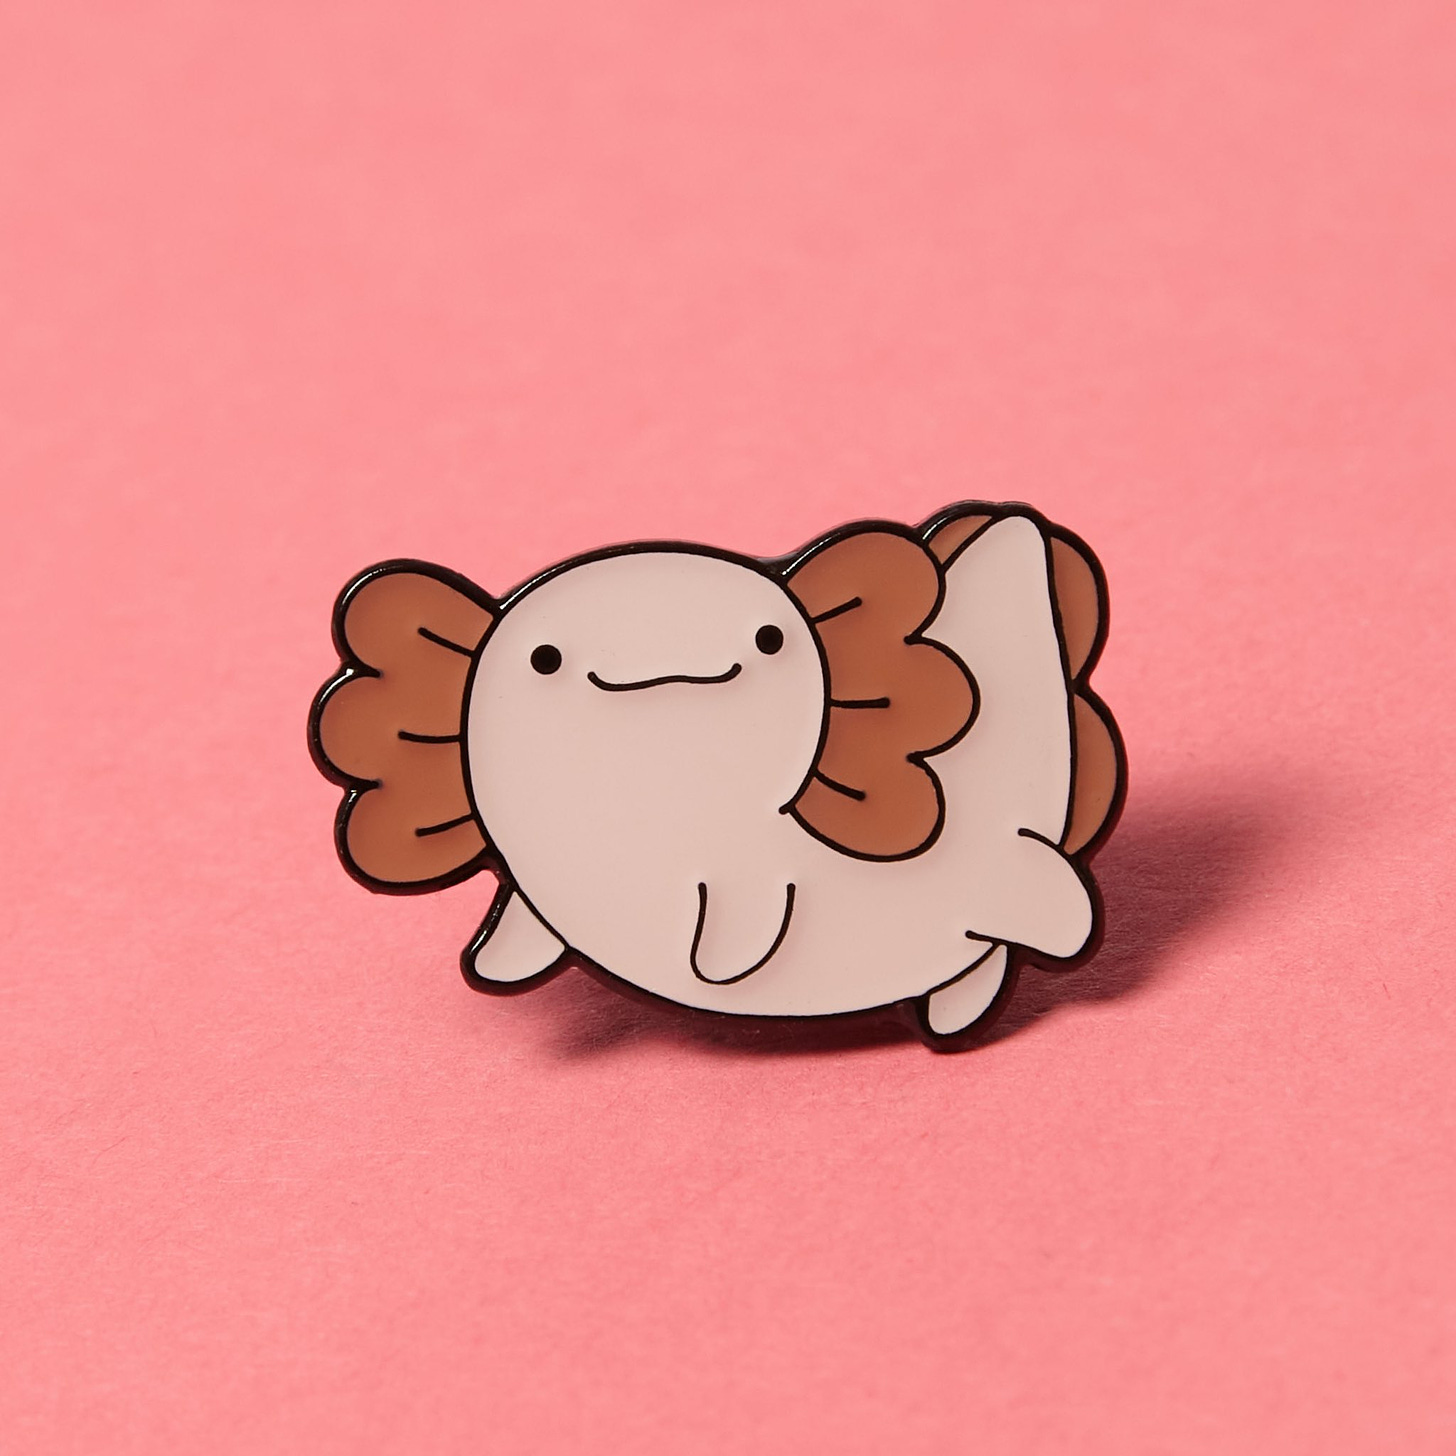 An enamel pin, of a smiling animal of some kind. Don't ask me, I'm not a zoologist.